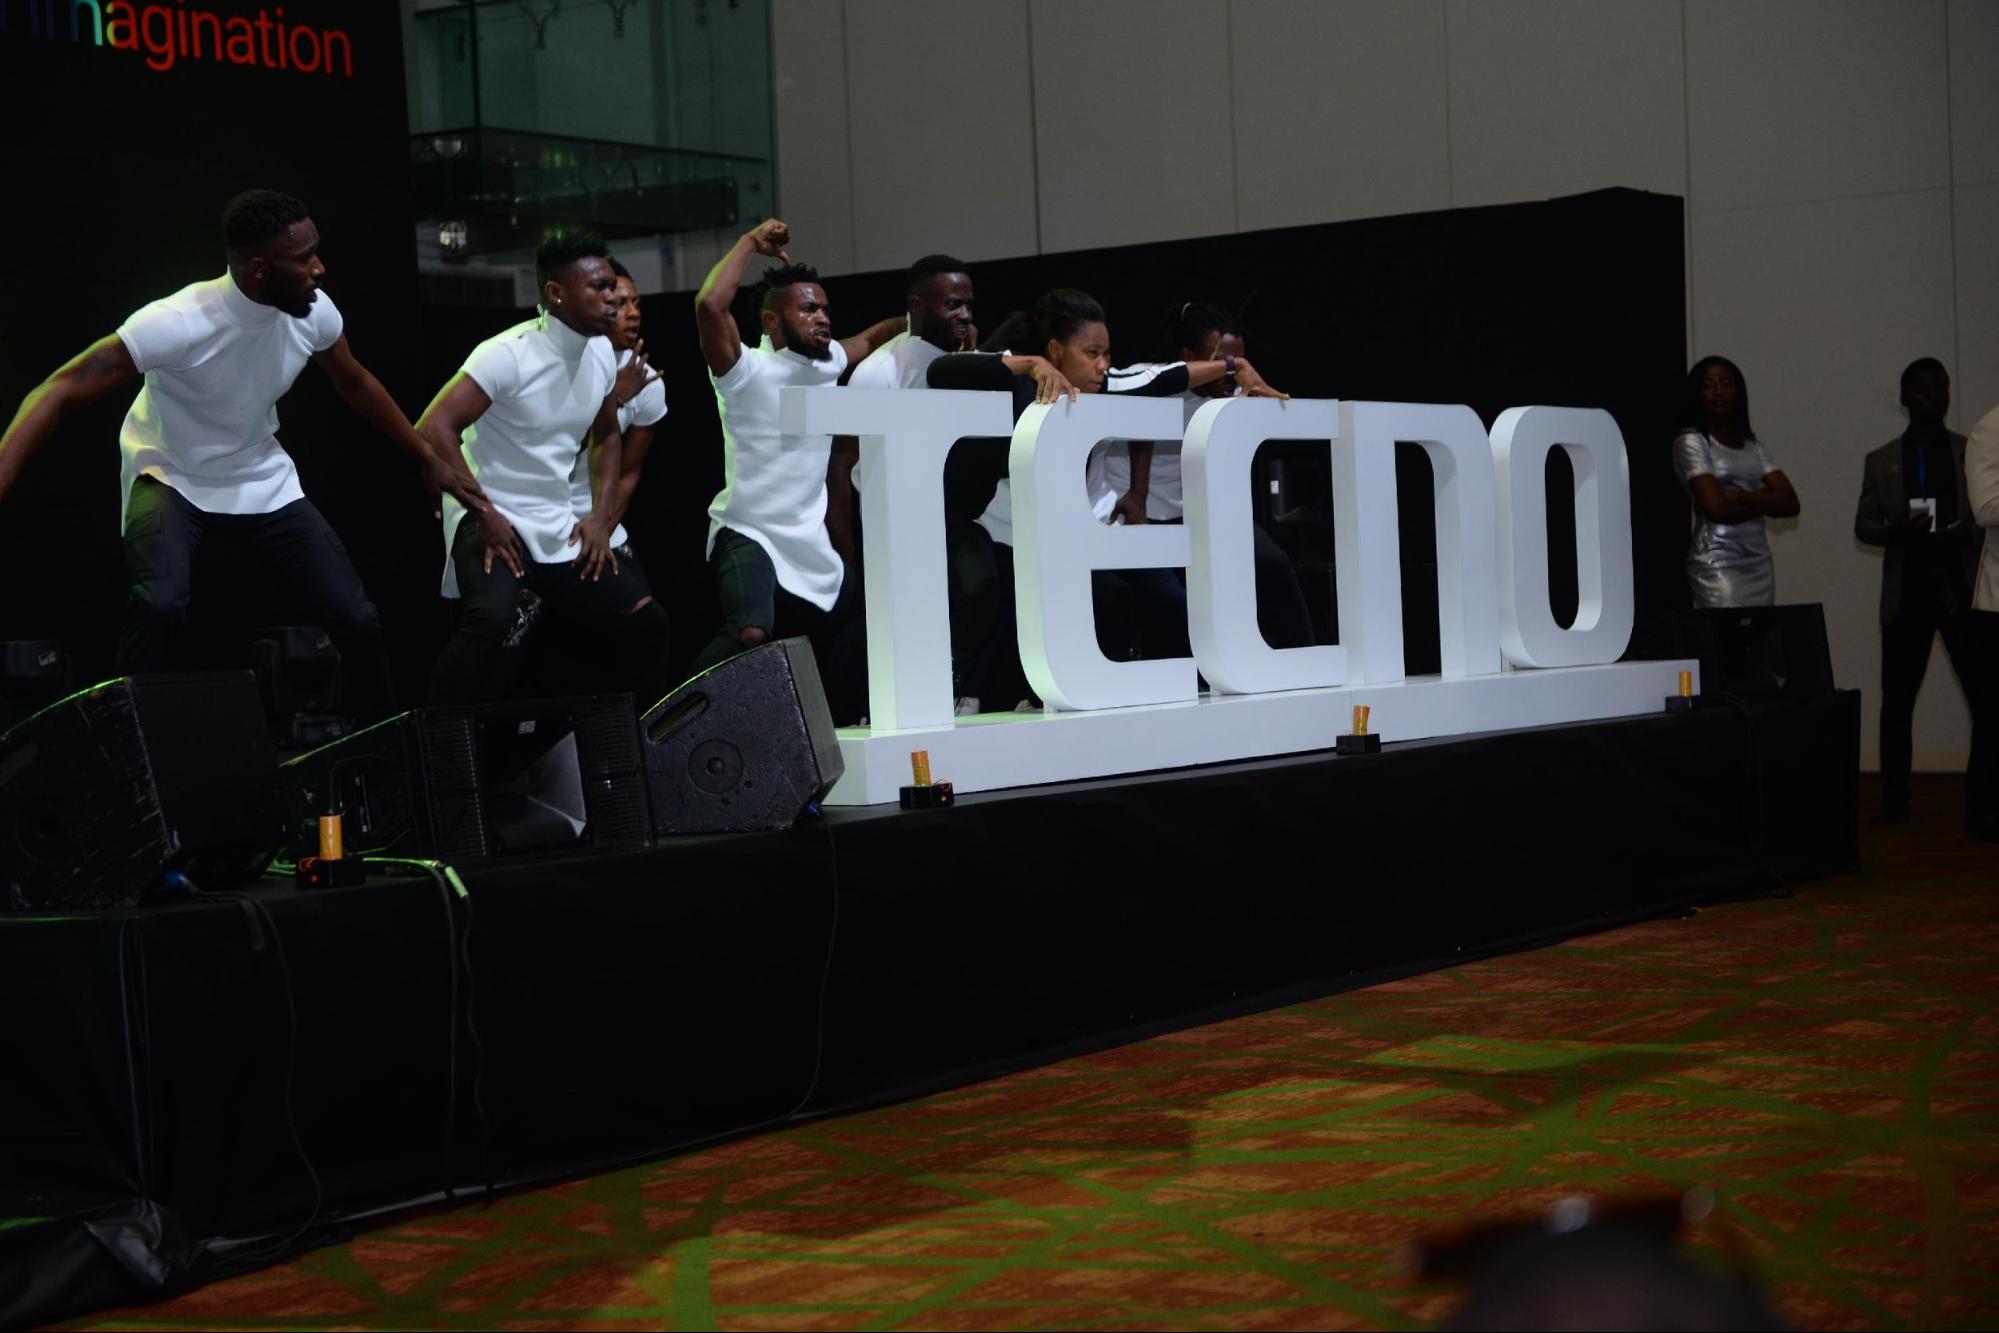 Highlights from the Camon X and Camon X Pro Global Spring Launch in Lagos (photos)